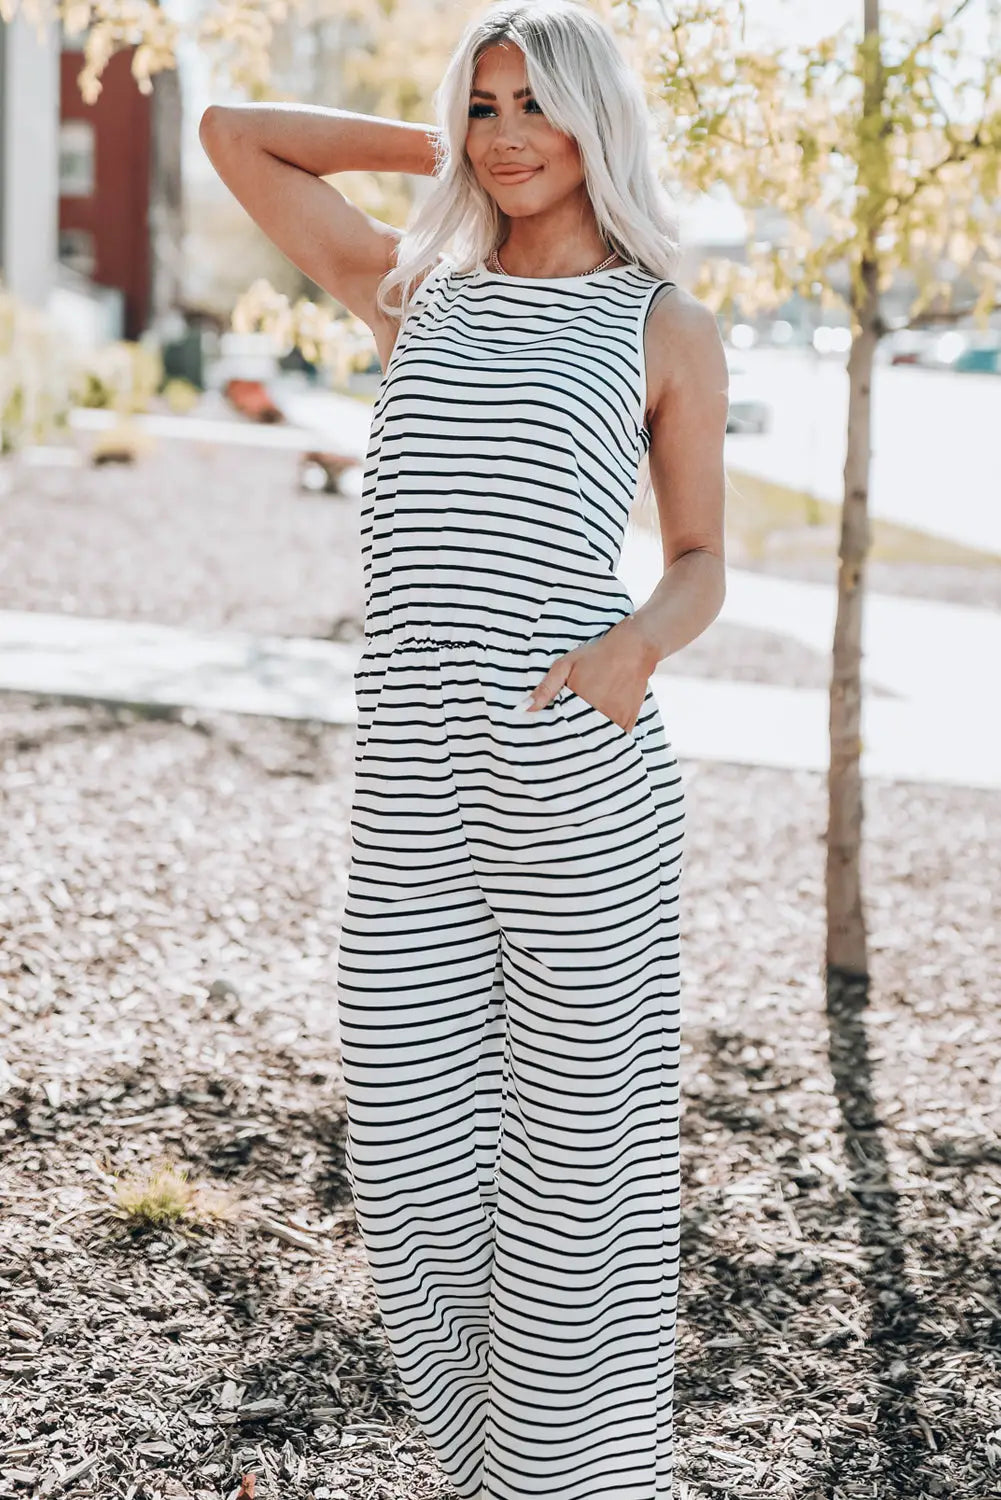 White striped print pocketed sleeveless jumpsuit - jumpsuits & rompers